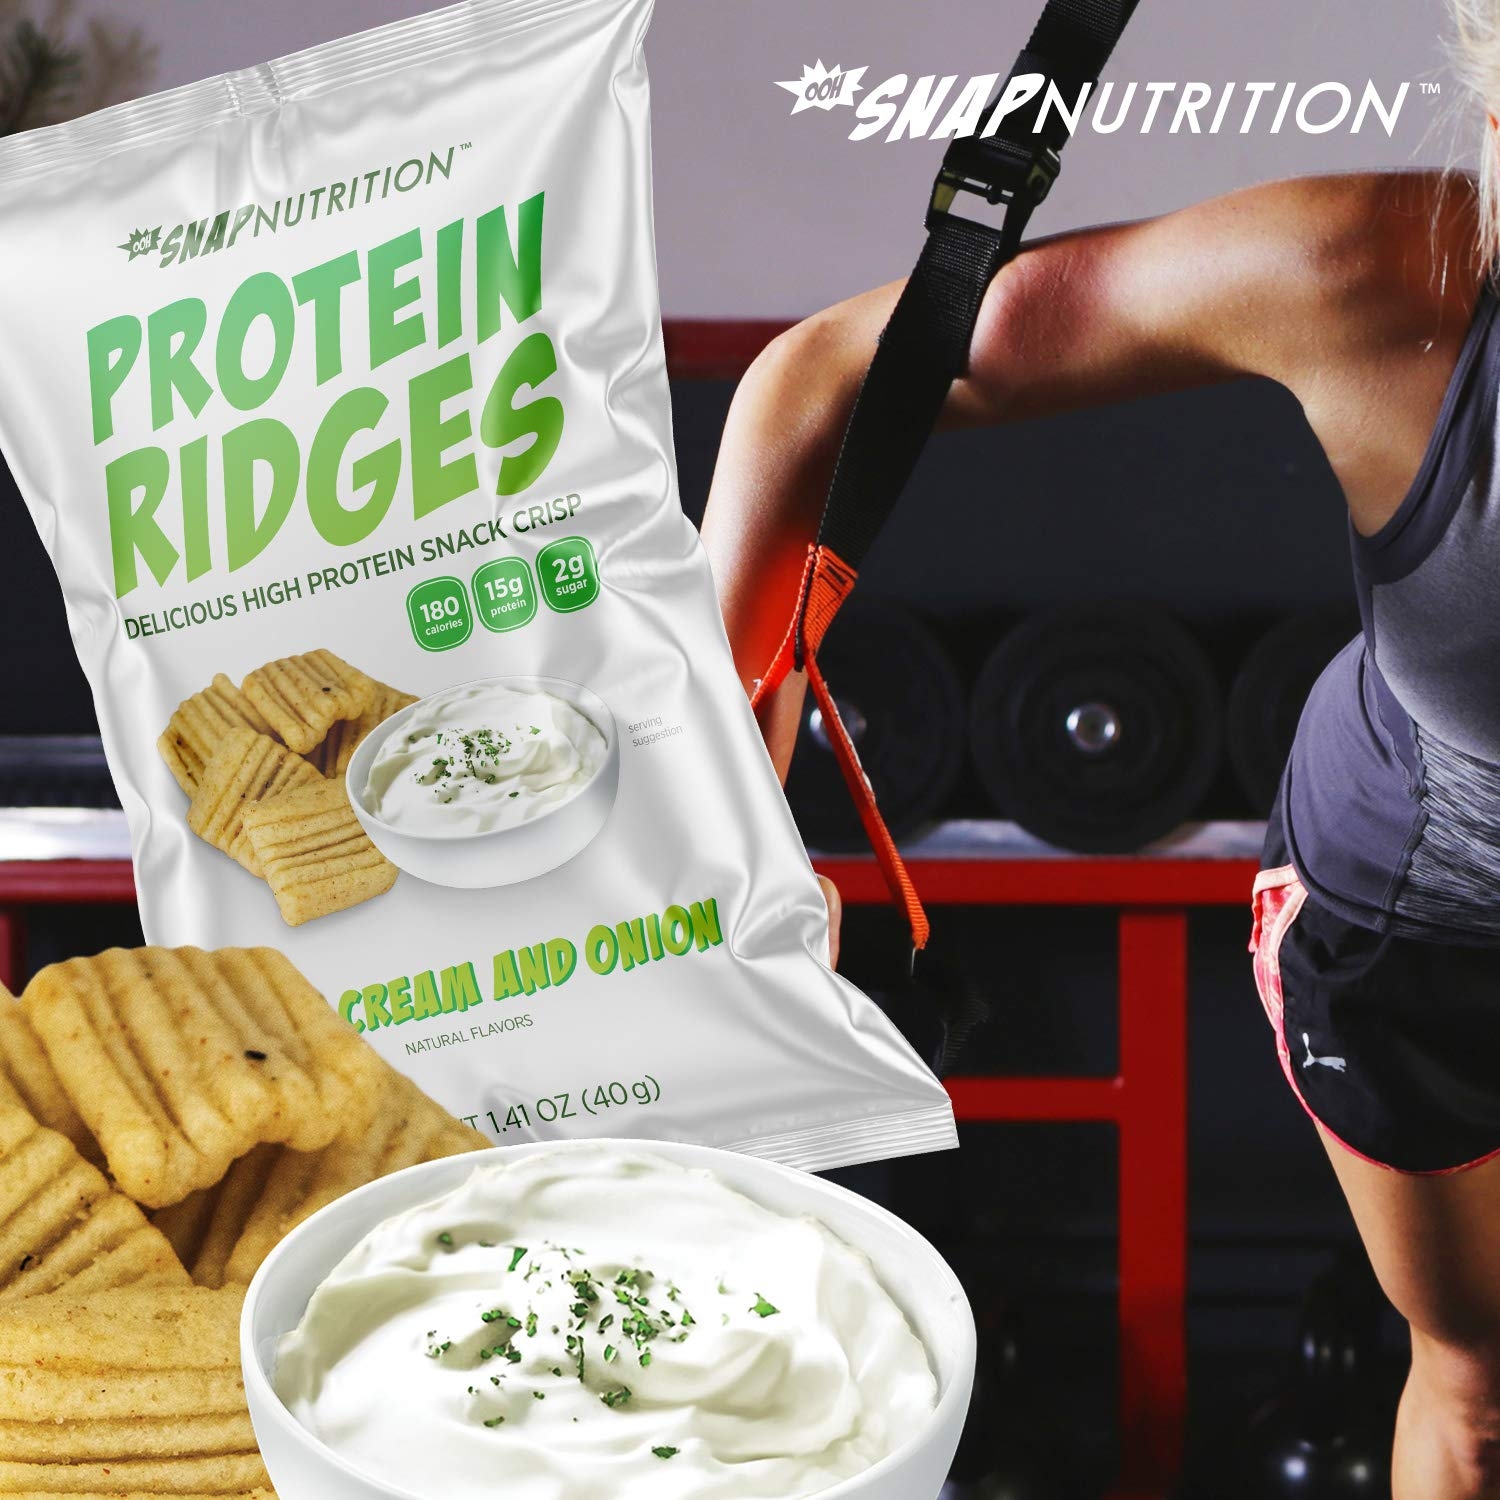 Ooh Snap Nutrition Protein Ridges - Gluten Free and All Natural Whey Protein Chips - Low Calories and Low Sugar Snack - Sour Cream and Onion, 15 Count